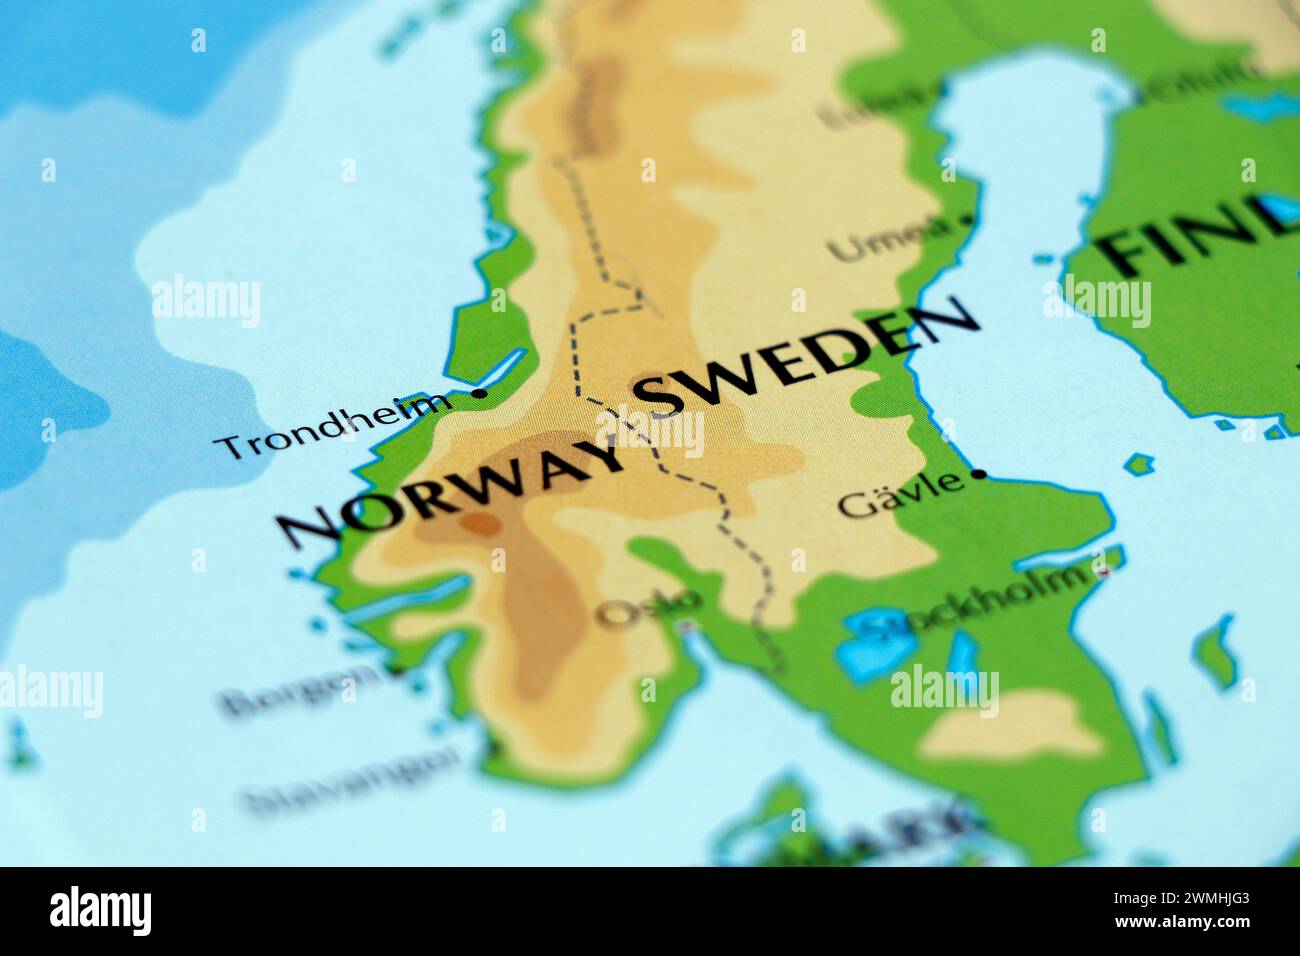 world map of europe, norway and sweden country in close up Stock Photo